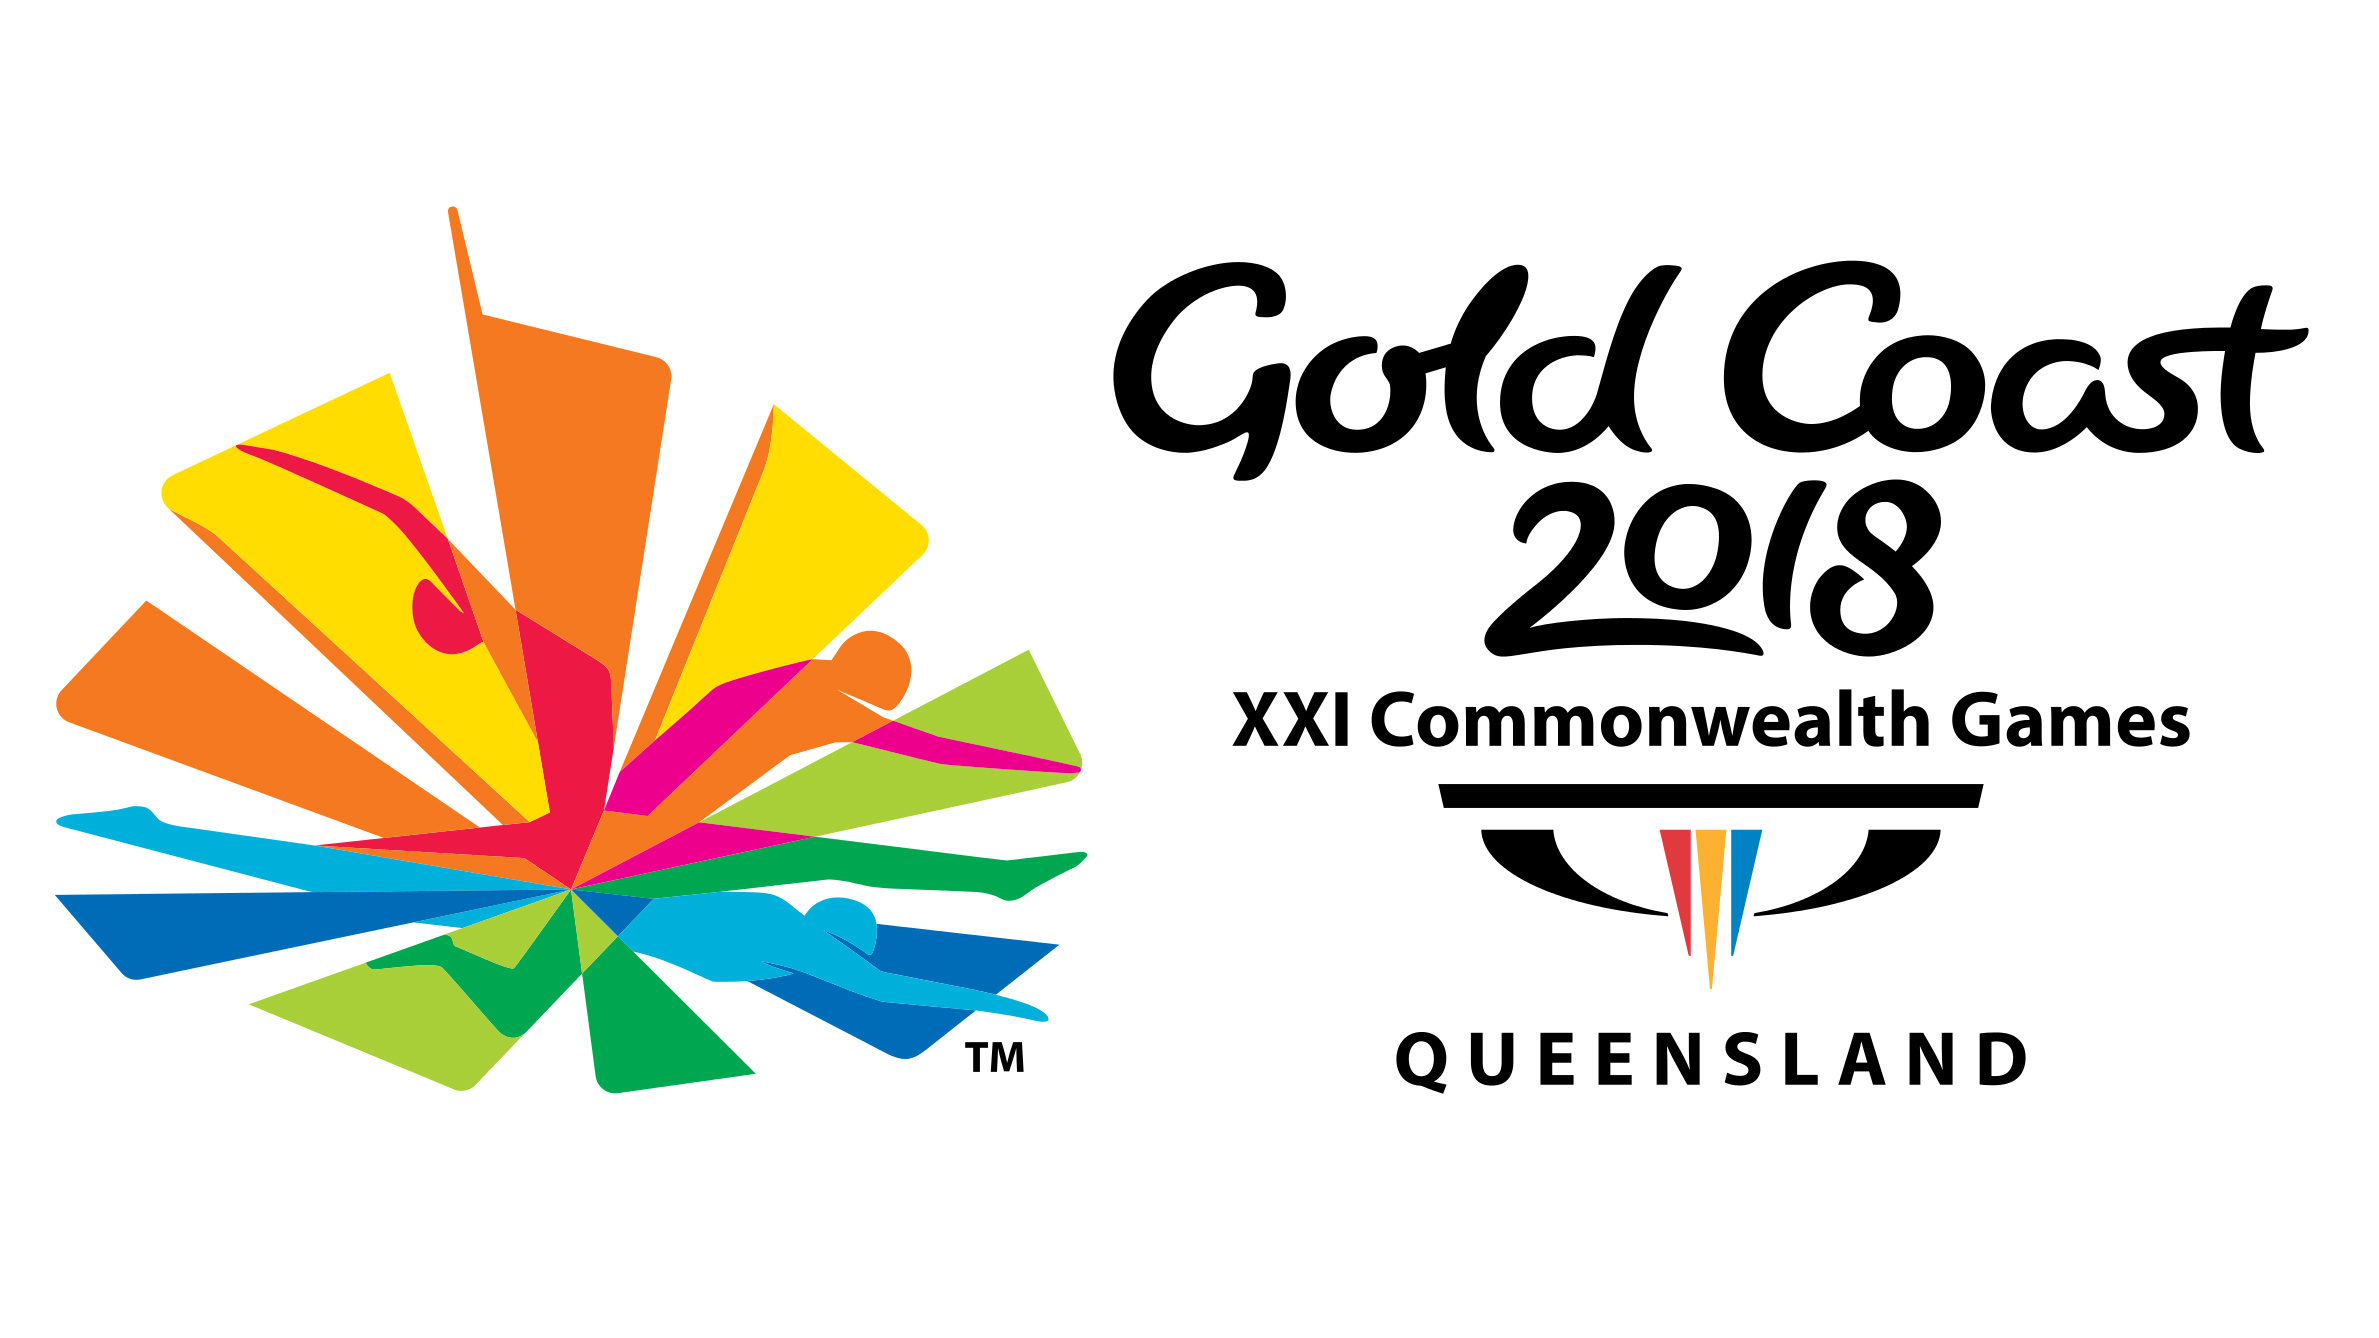 Games commonwealth Commonwealth Games: